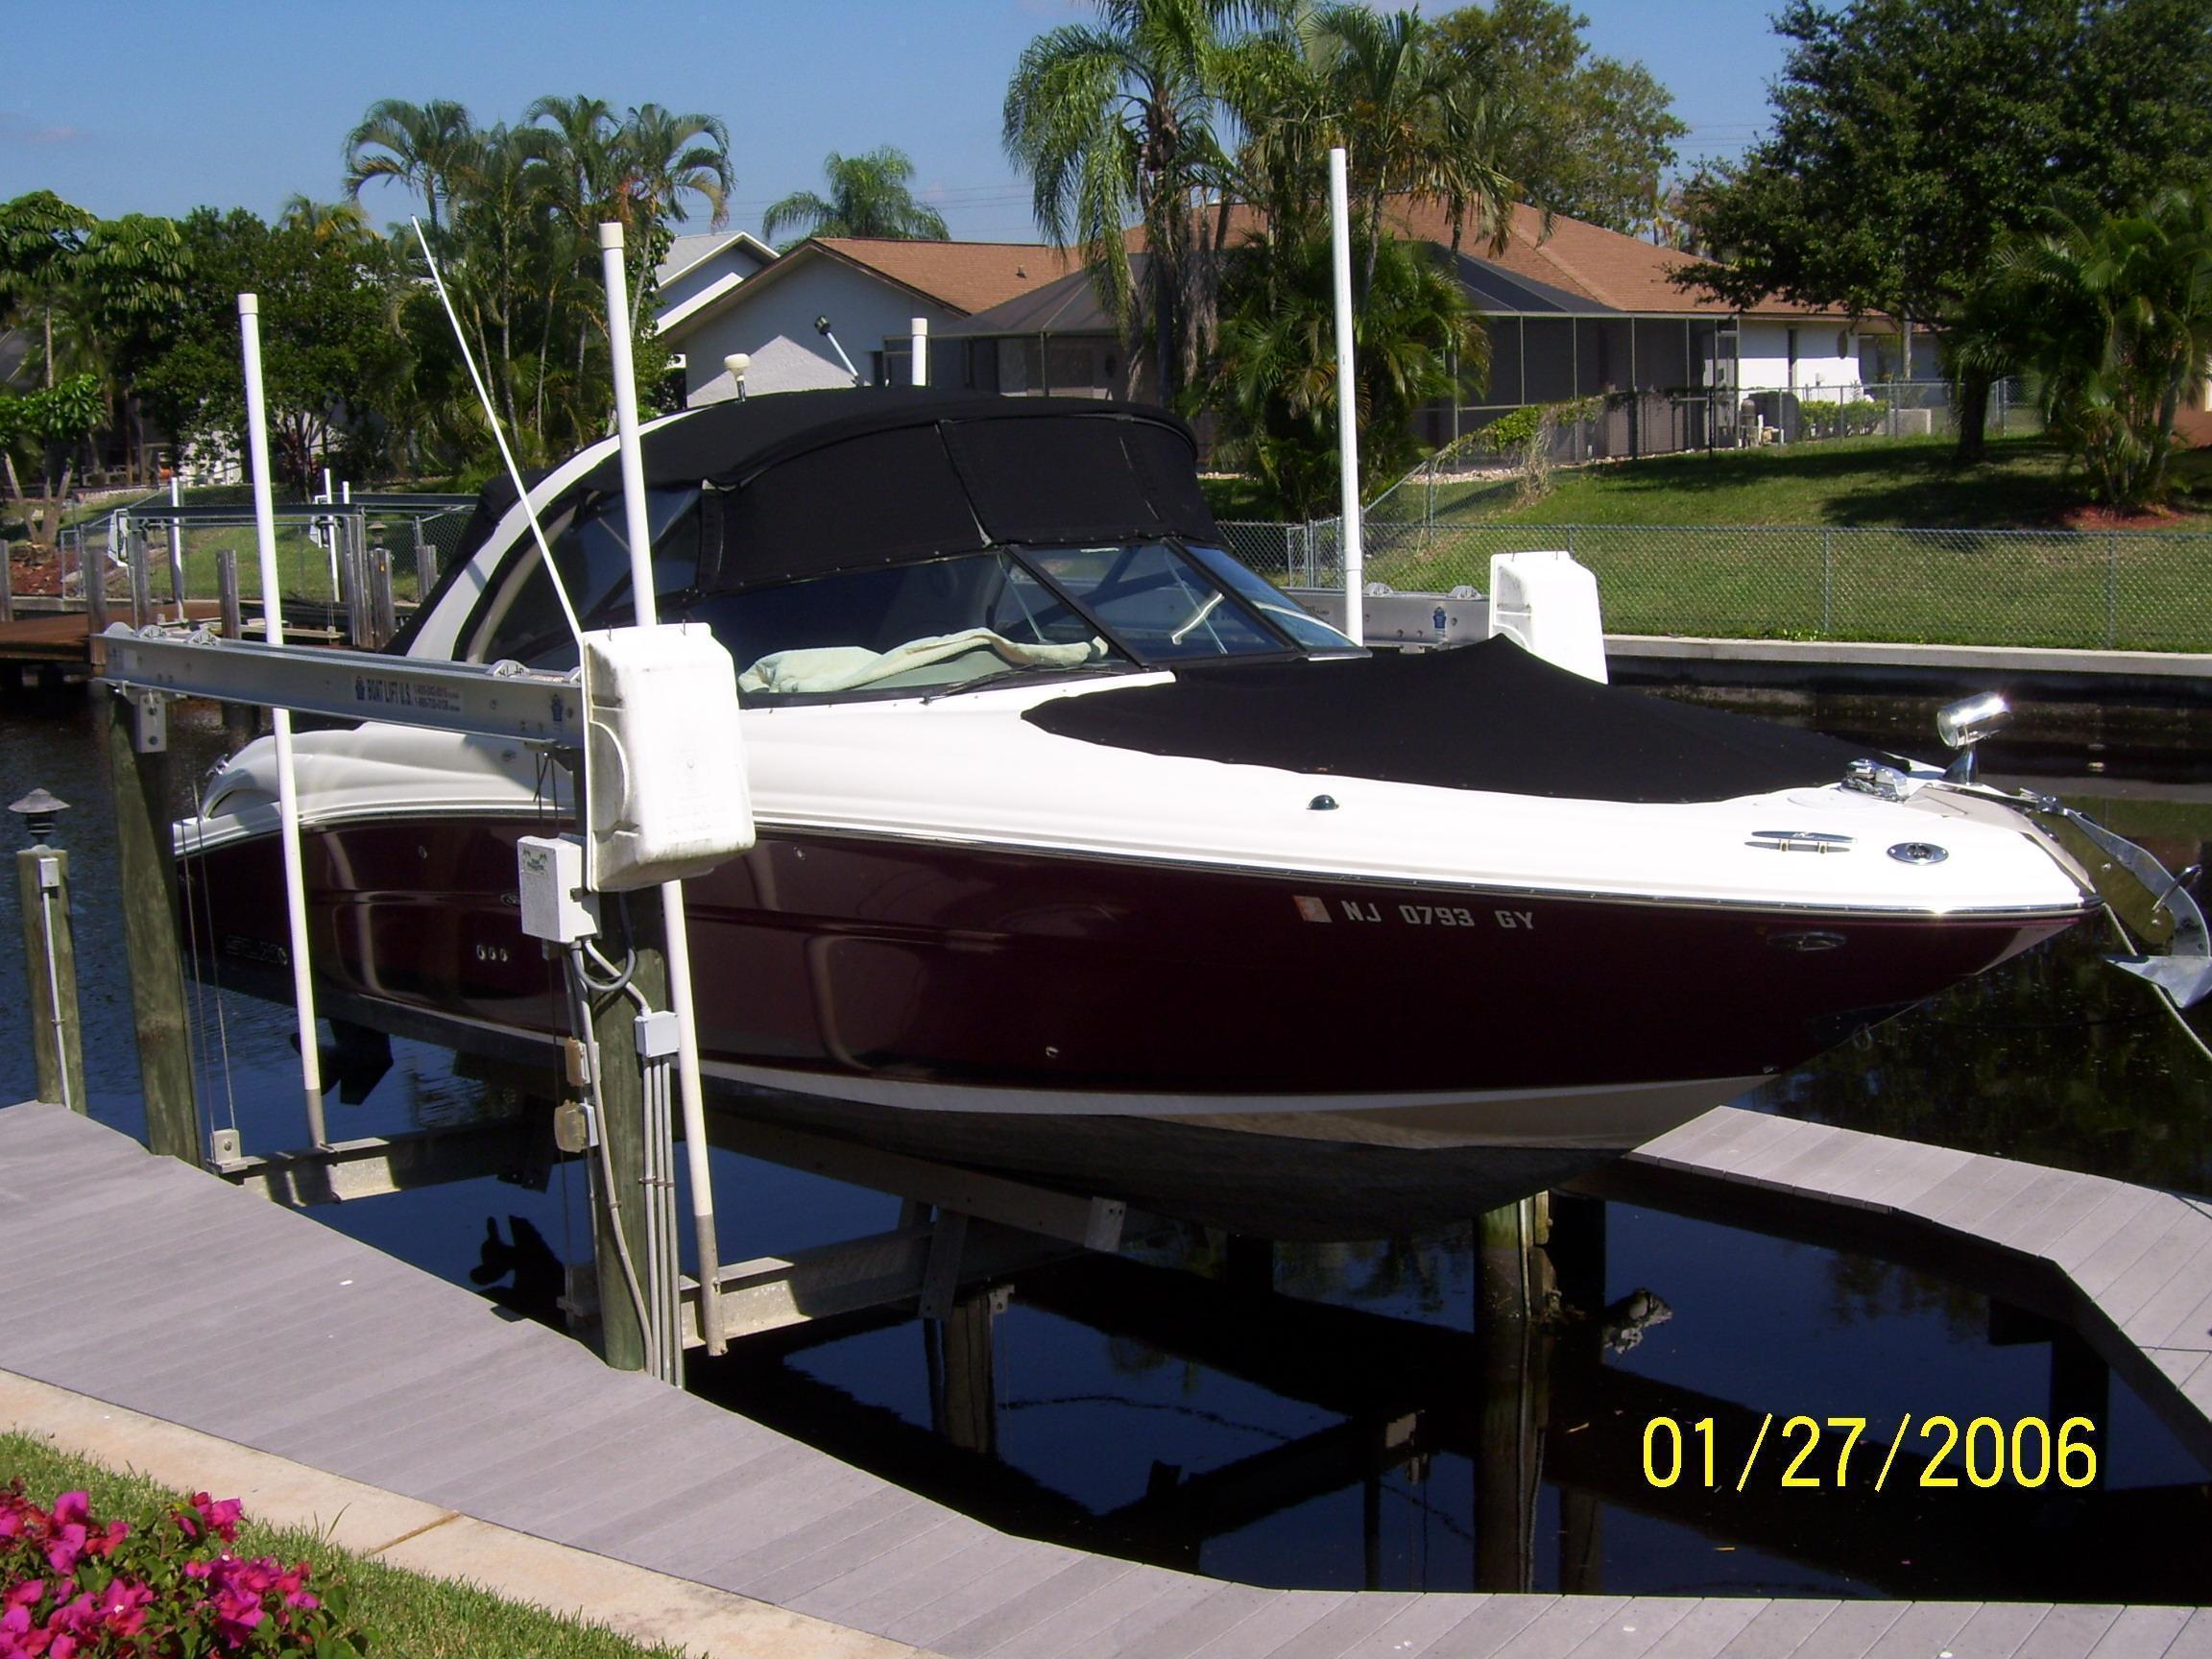 Sea Ray 290 Select EX, Ft. Myers